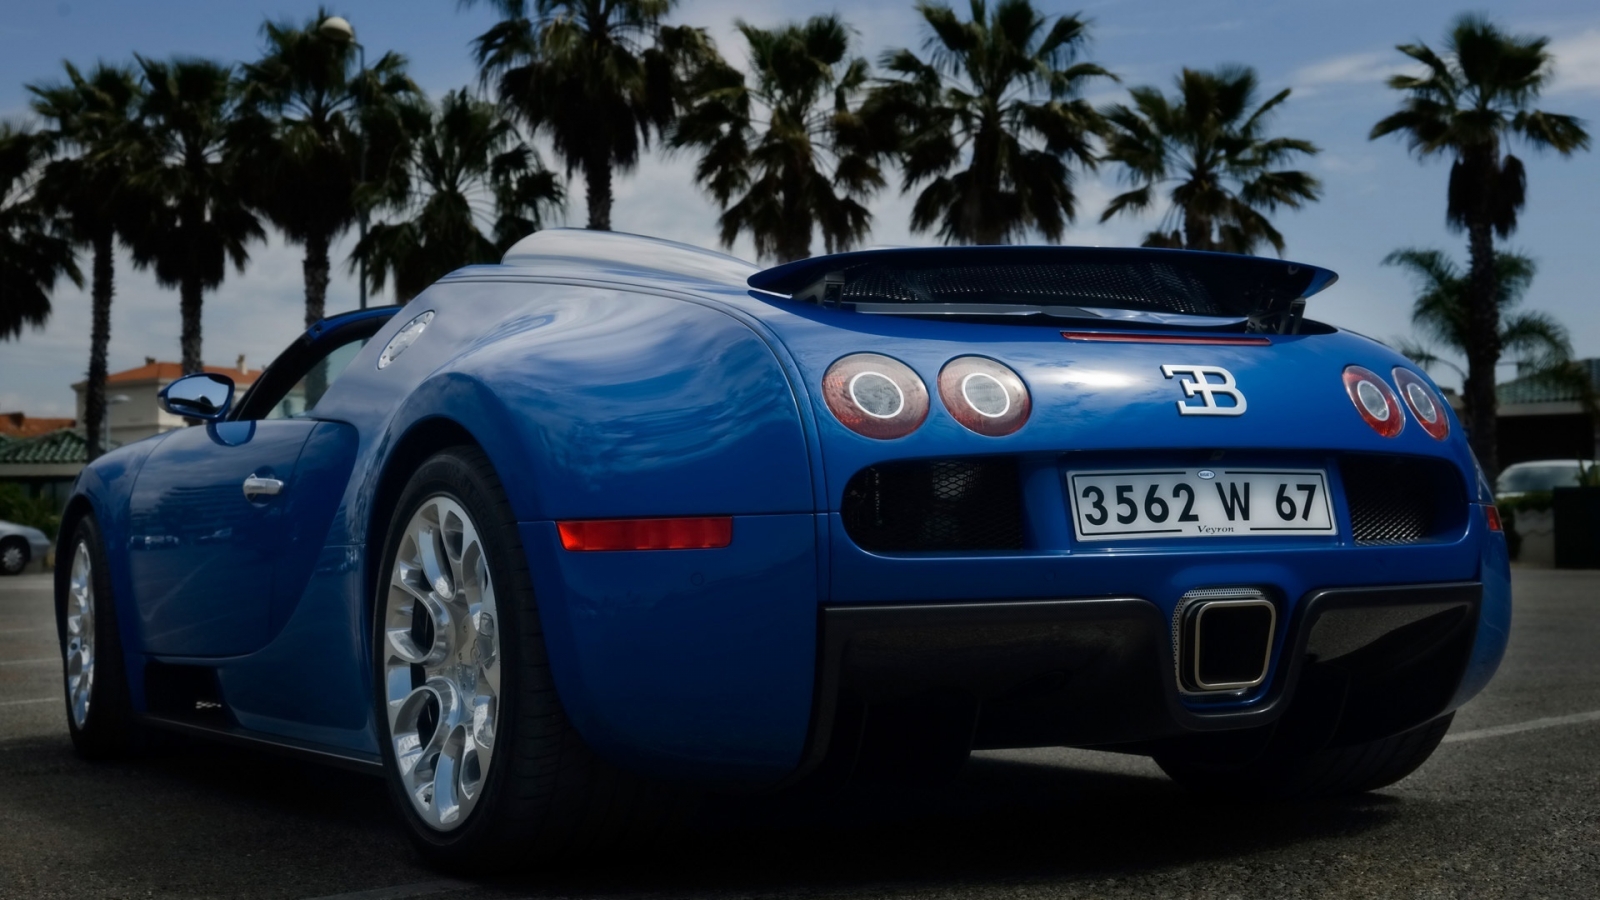 Bugatti Veyron 16.4 Grand Sport 2010 in Cannes - Rear Angle 2 for 1600 x 900 HDTV resolution